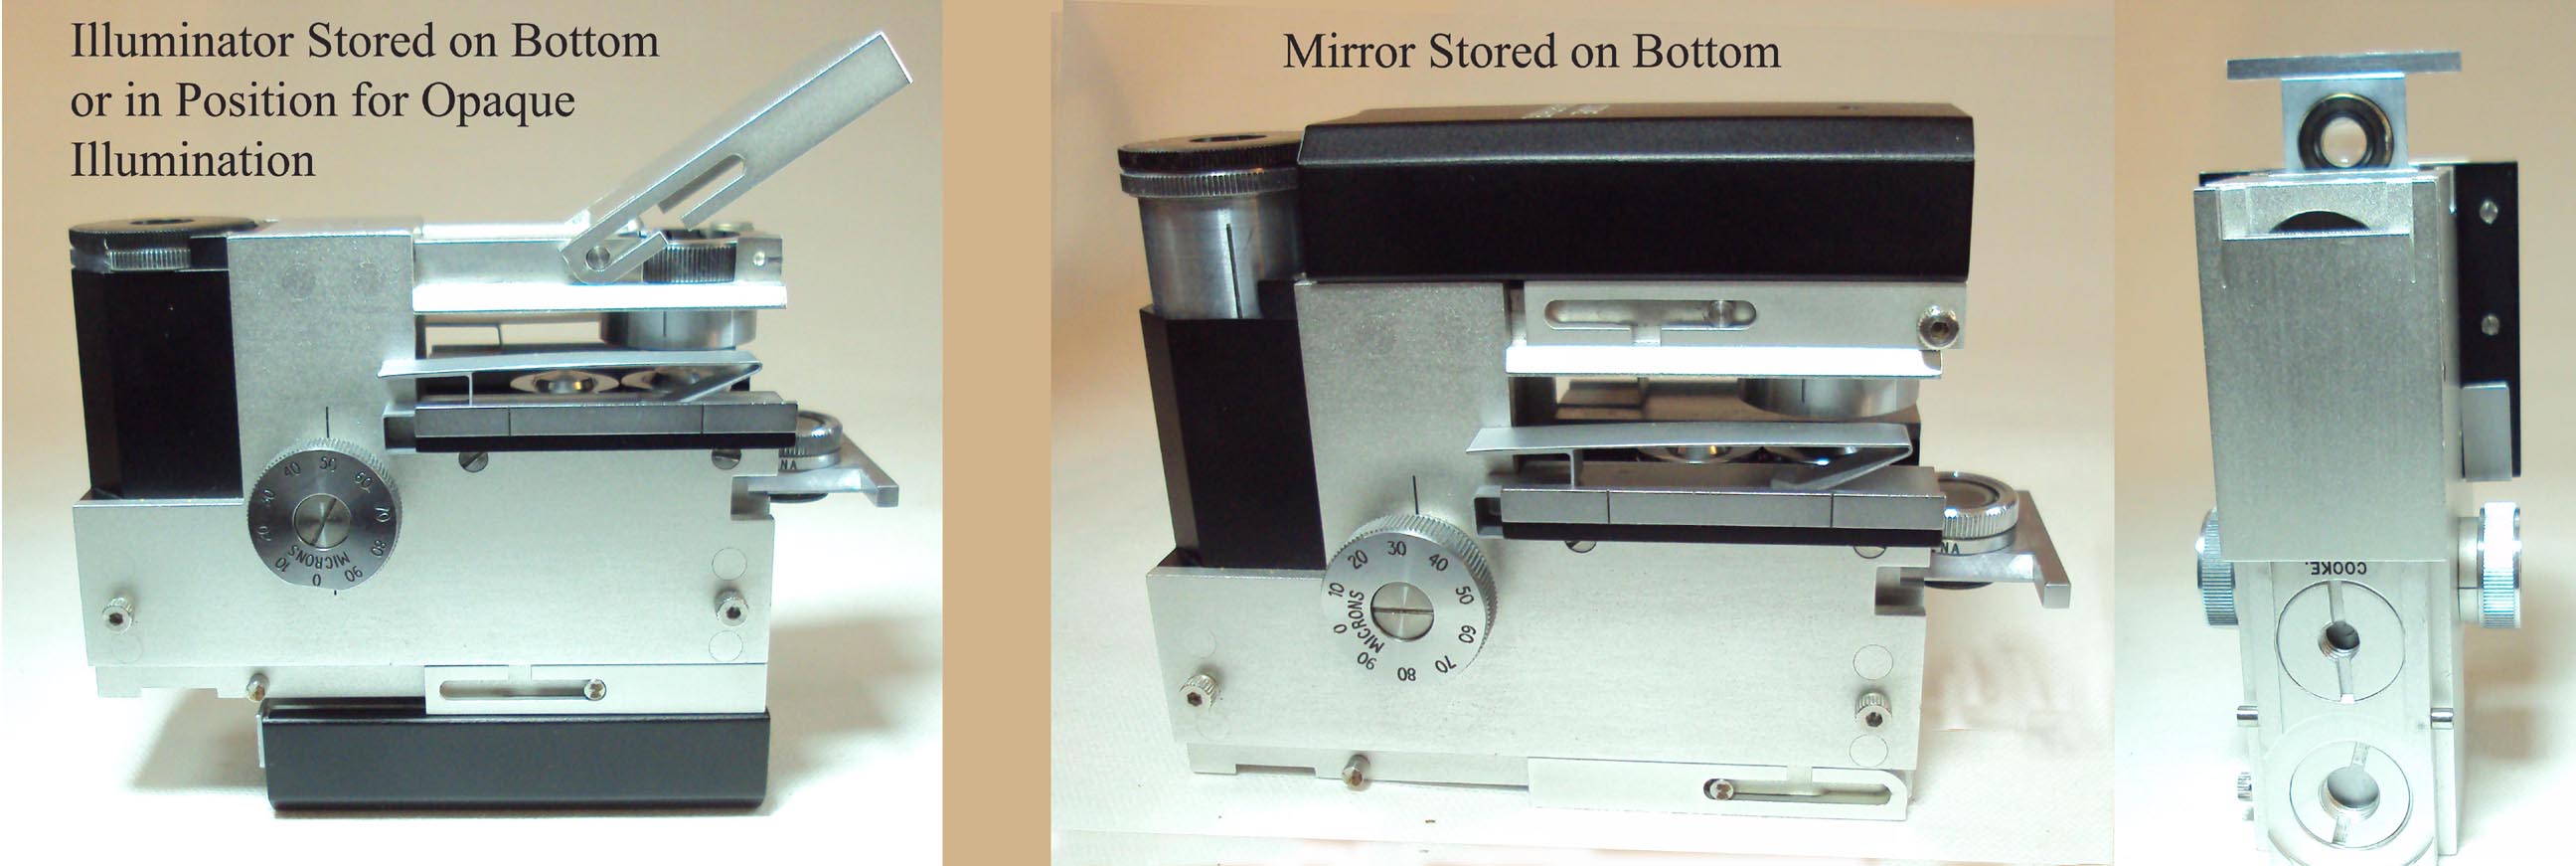 views of bottom footplate and attachement of mirror for storage or illuminator for opaque lighting